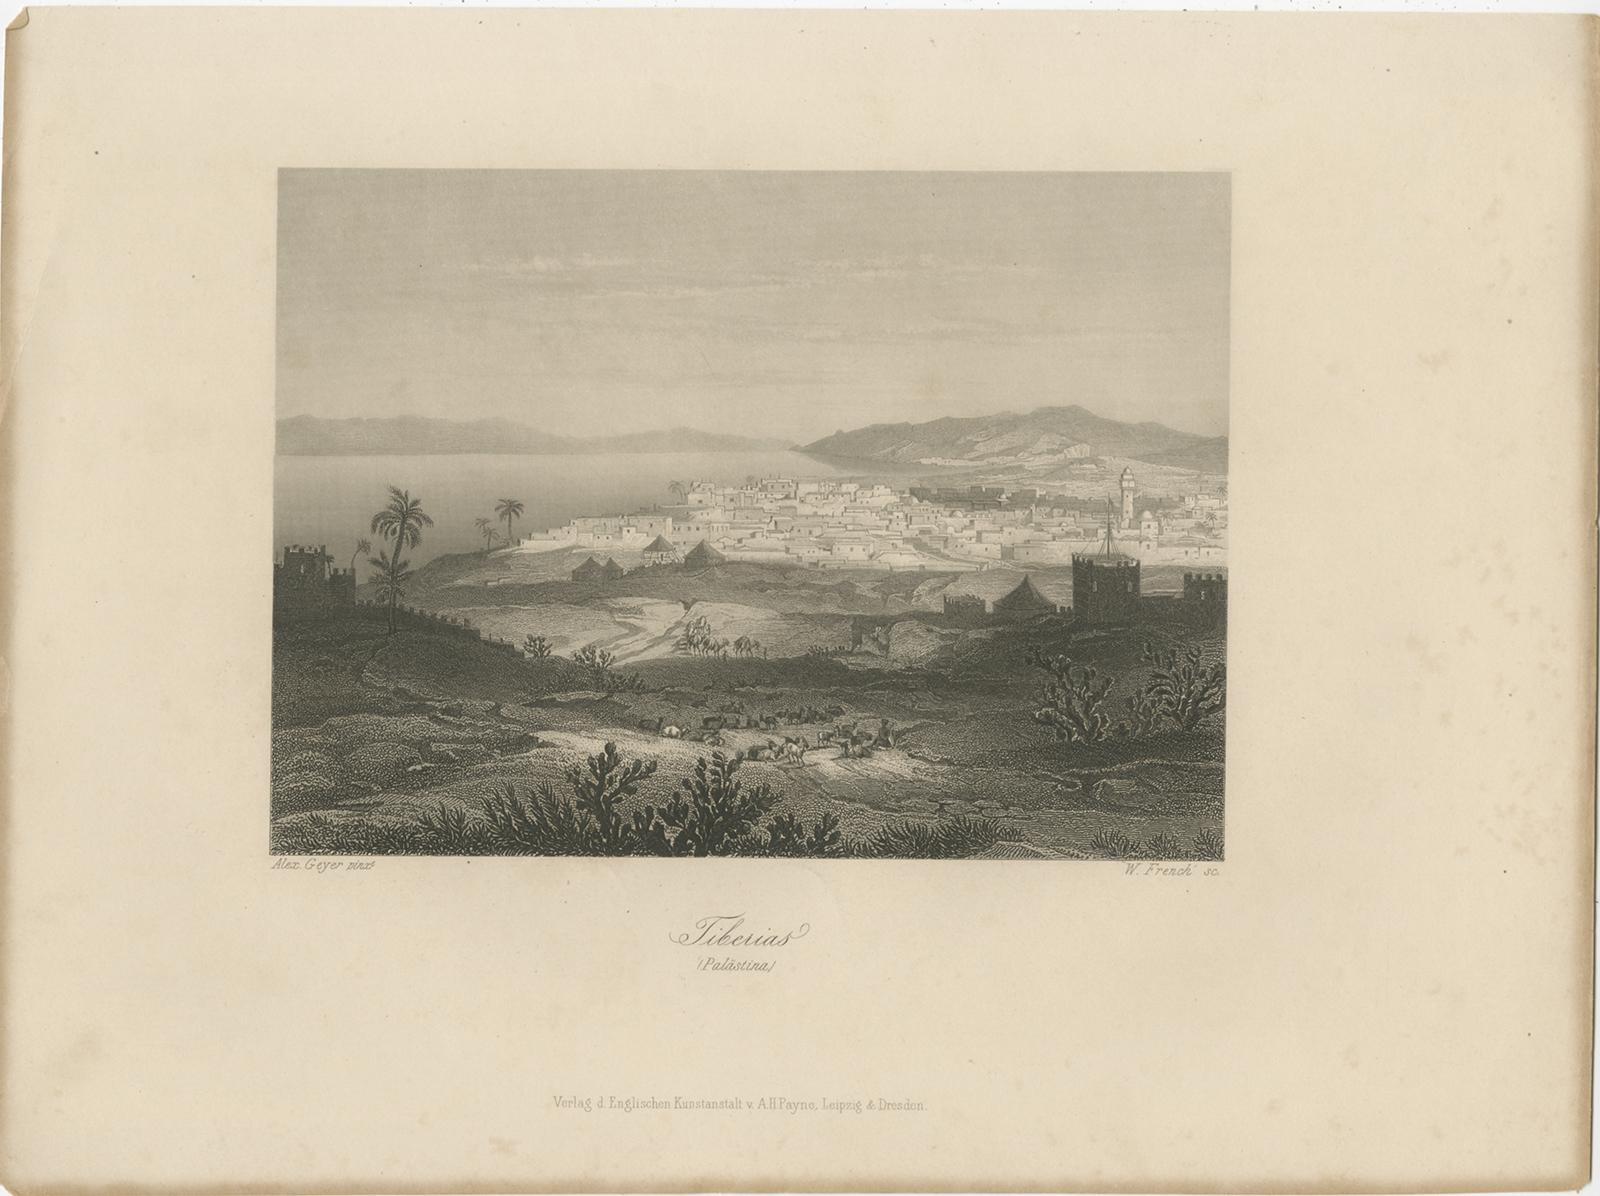 Description: Antique print titled 'Tiberias (Palästina)'. 

View of Tiberias (Palestina).

Tiberias is an Israeli city on the western shore of the Sea of Galilee. Established around 20 CE, it was named in honour of the second emperor of the